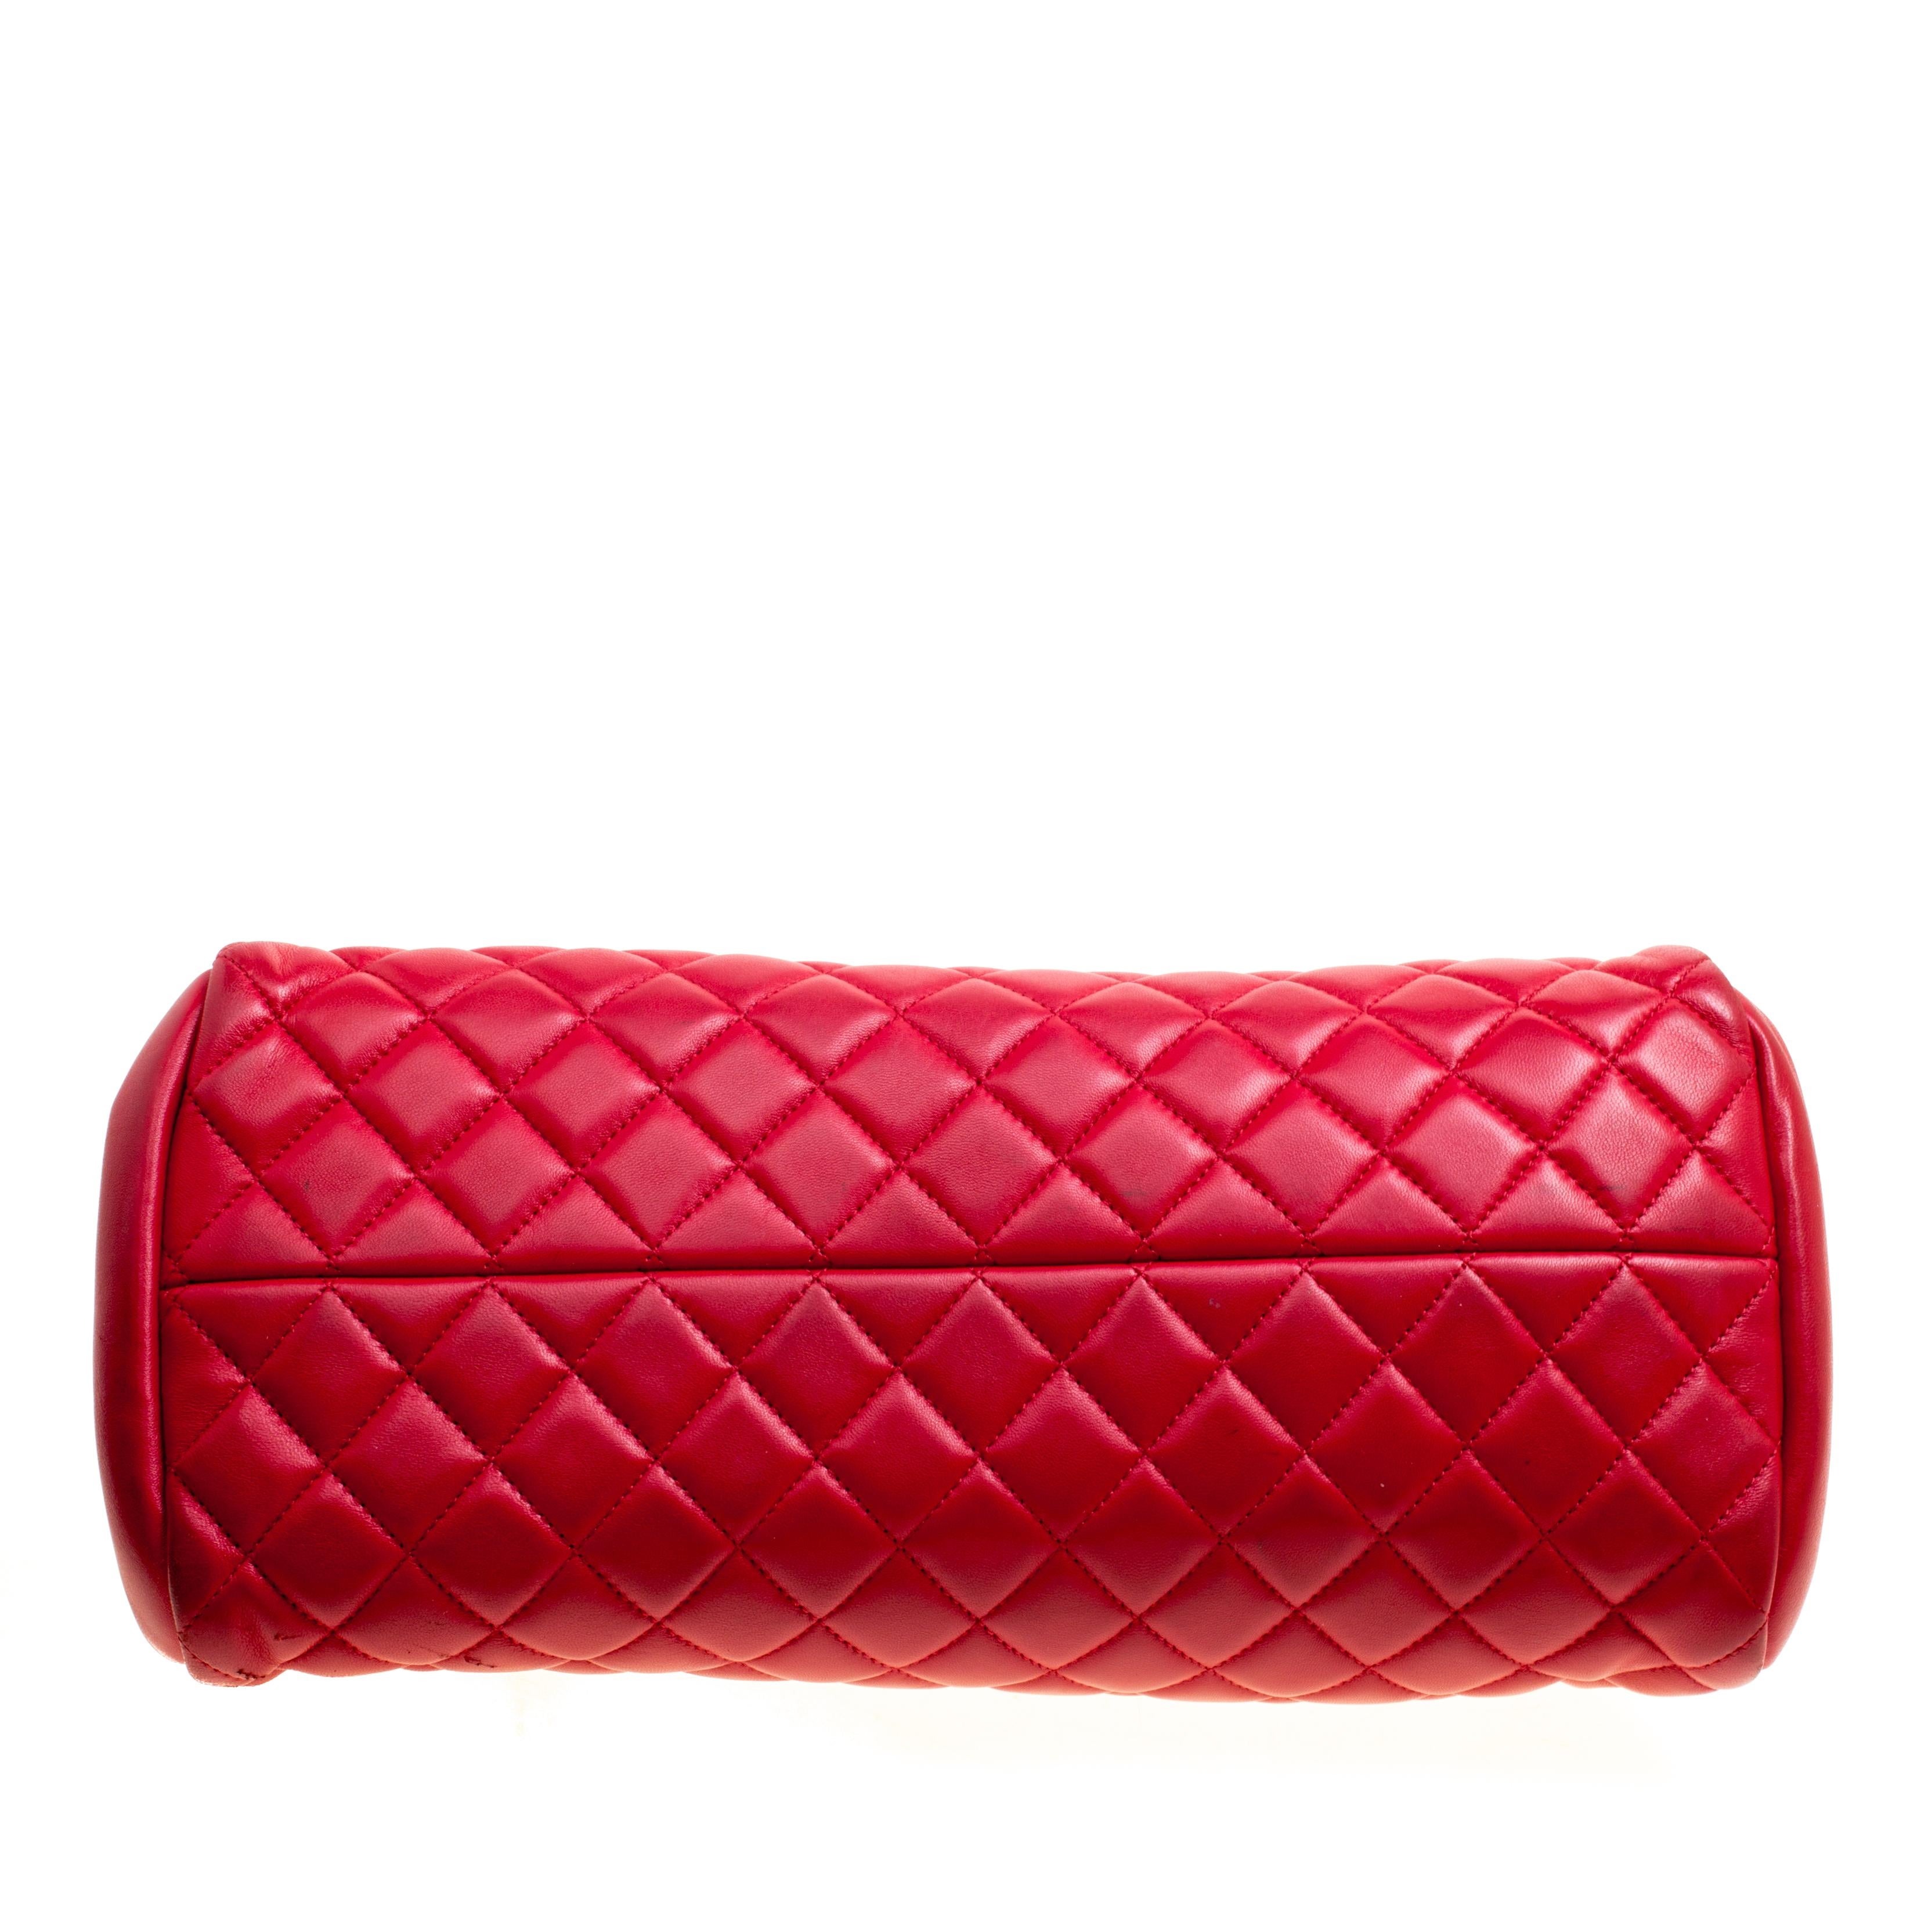 Chanel Red Quilted Leather Medium Just Mademoiselle Bowling Bag 6